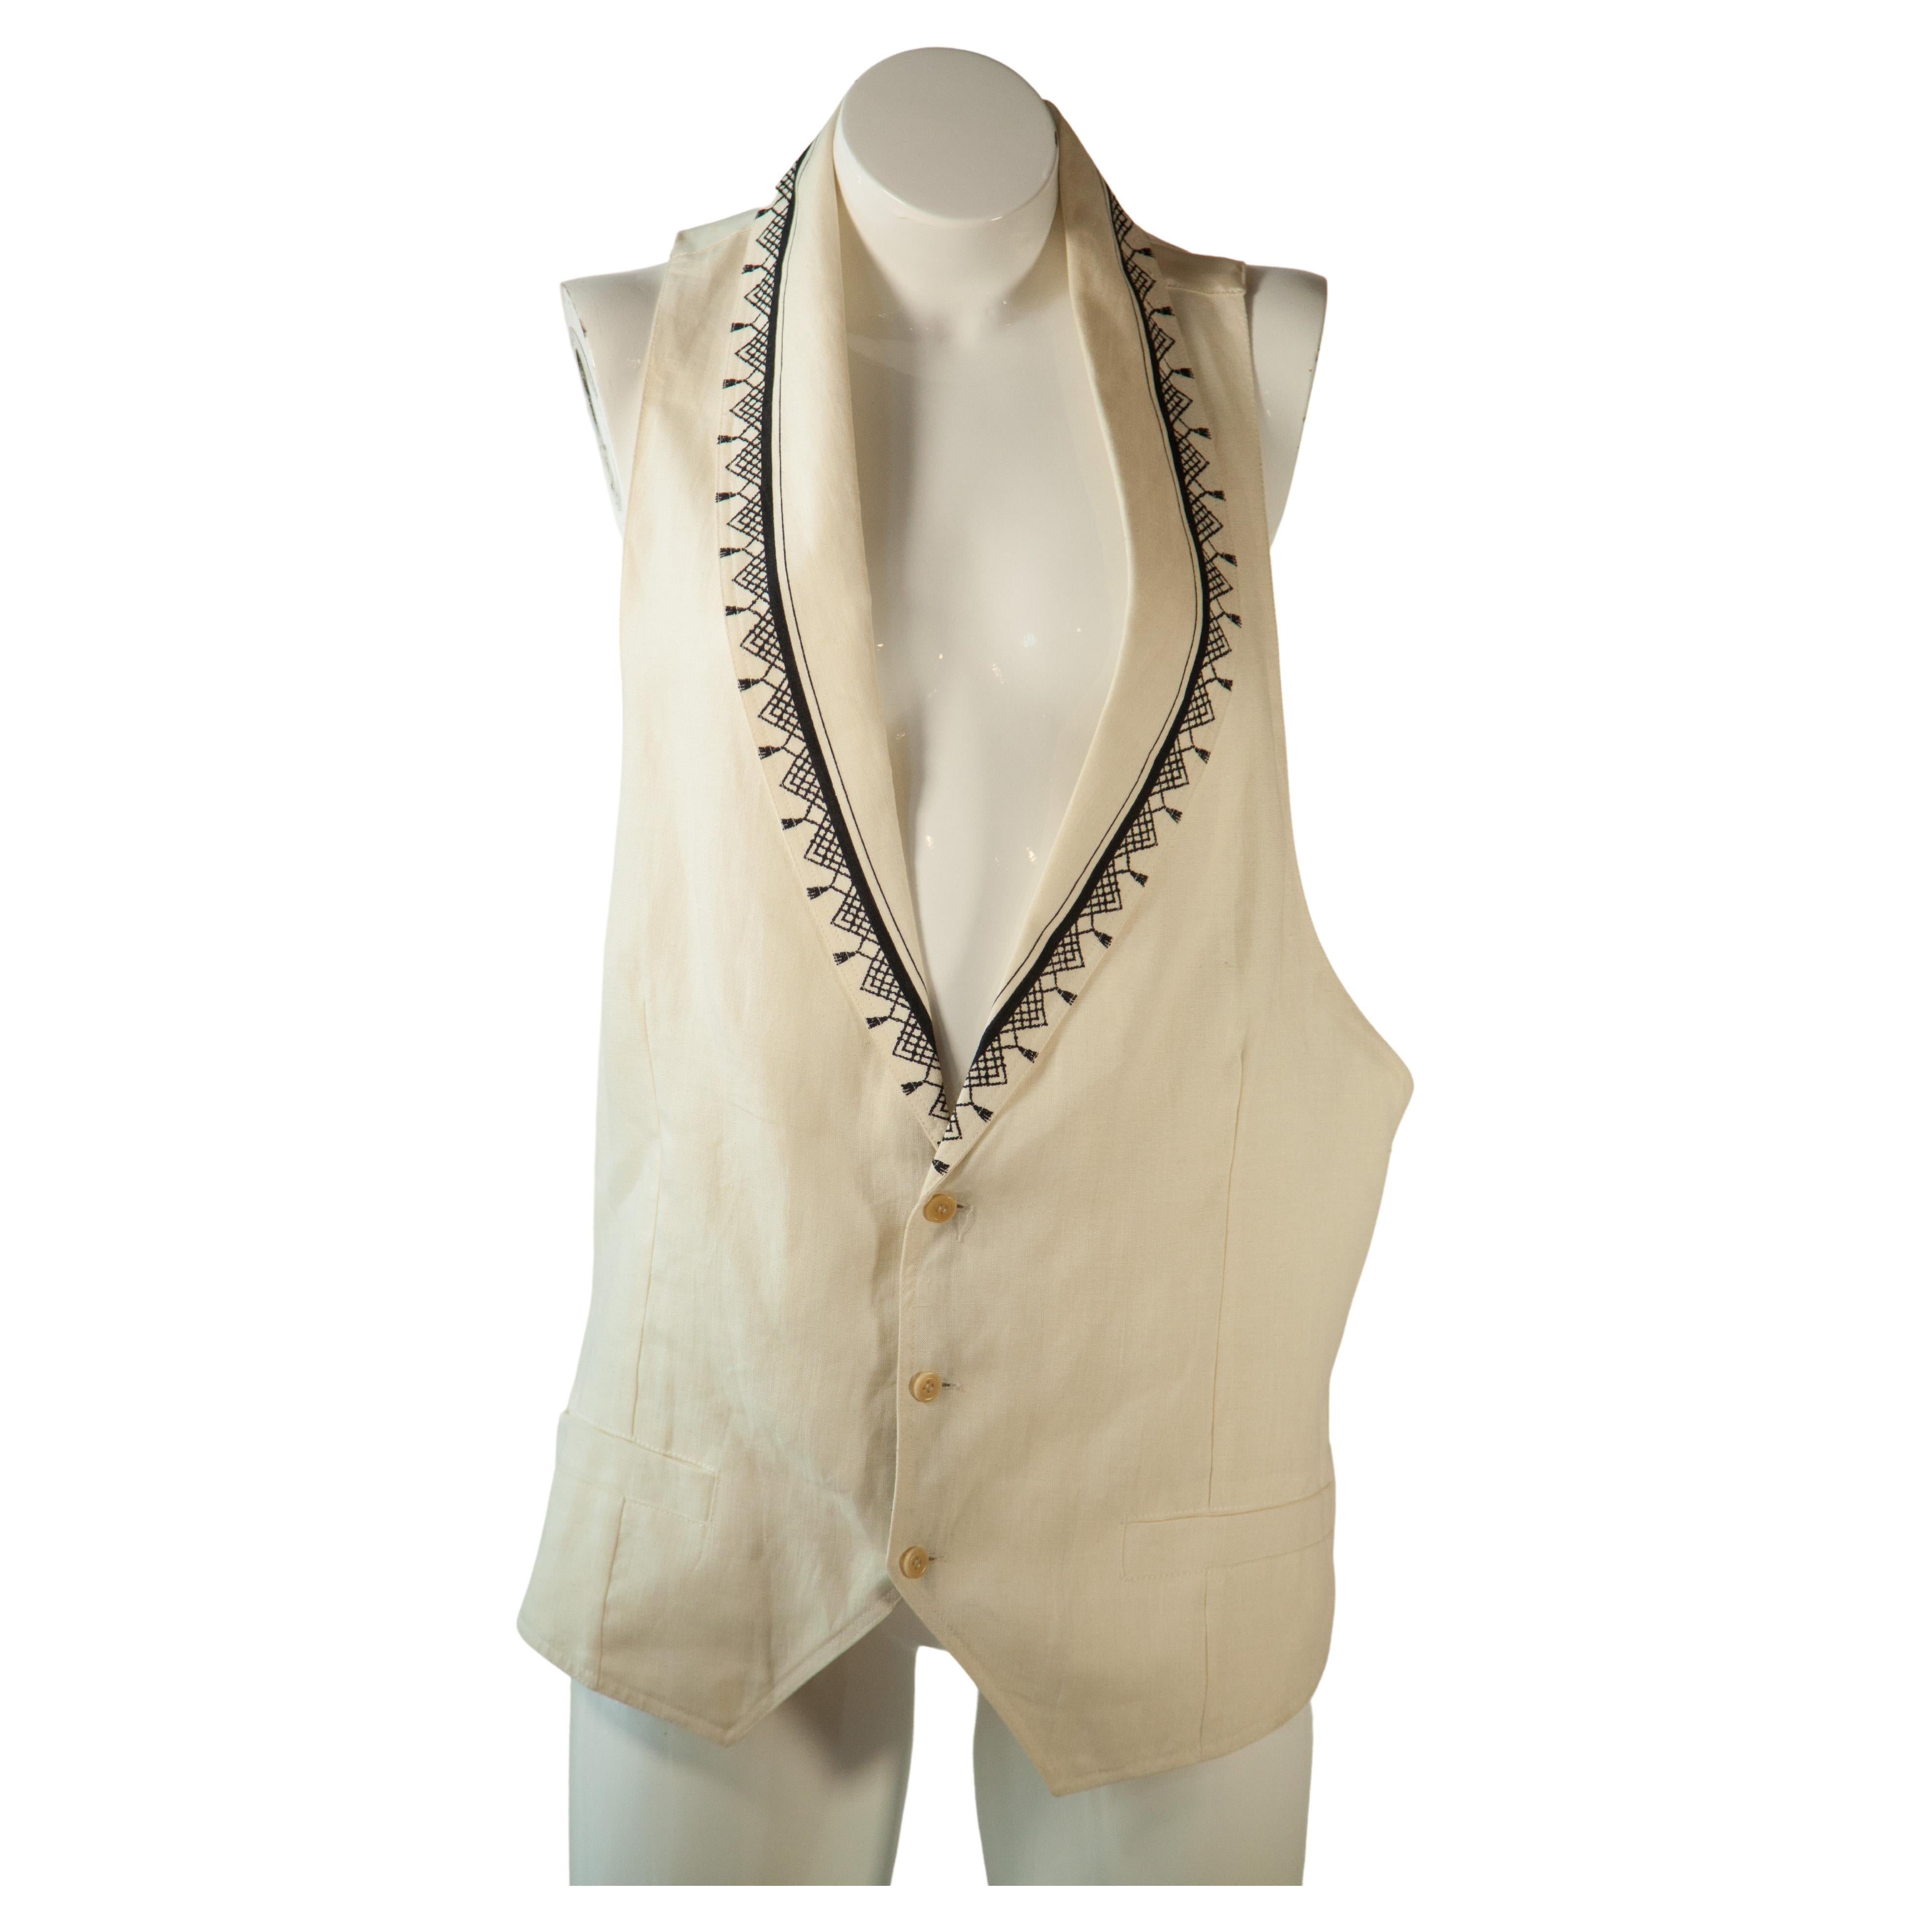 Gianni Versace, Creme Linen Vest with Embroidered Collar, 1980s